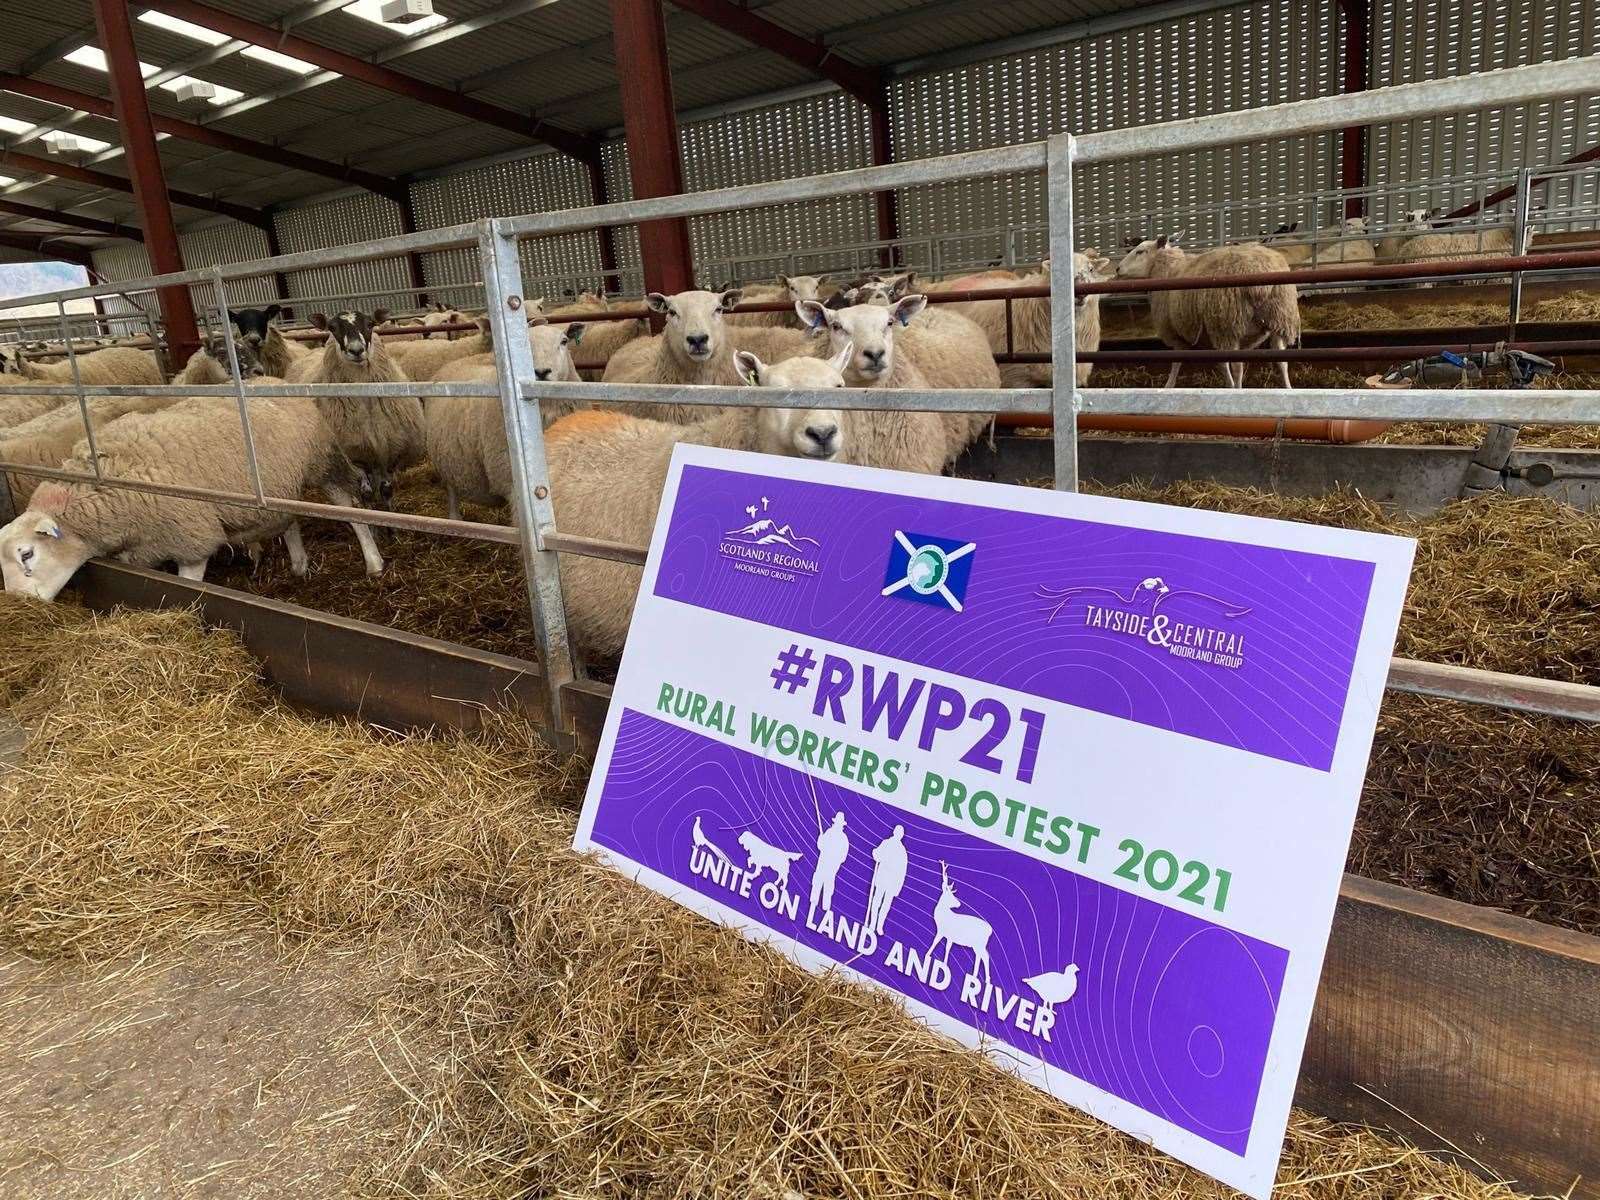 Official Rural Workers’ Protest banner pictured on a farm in Highland Perthshire.